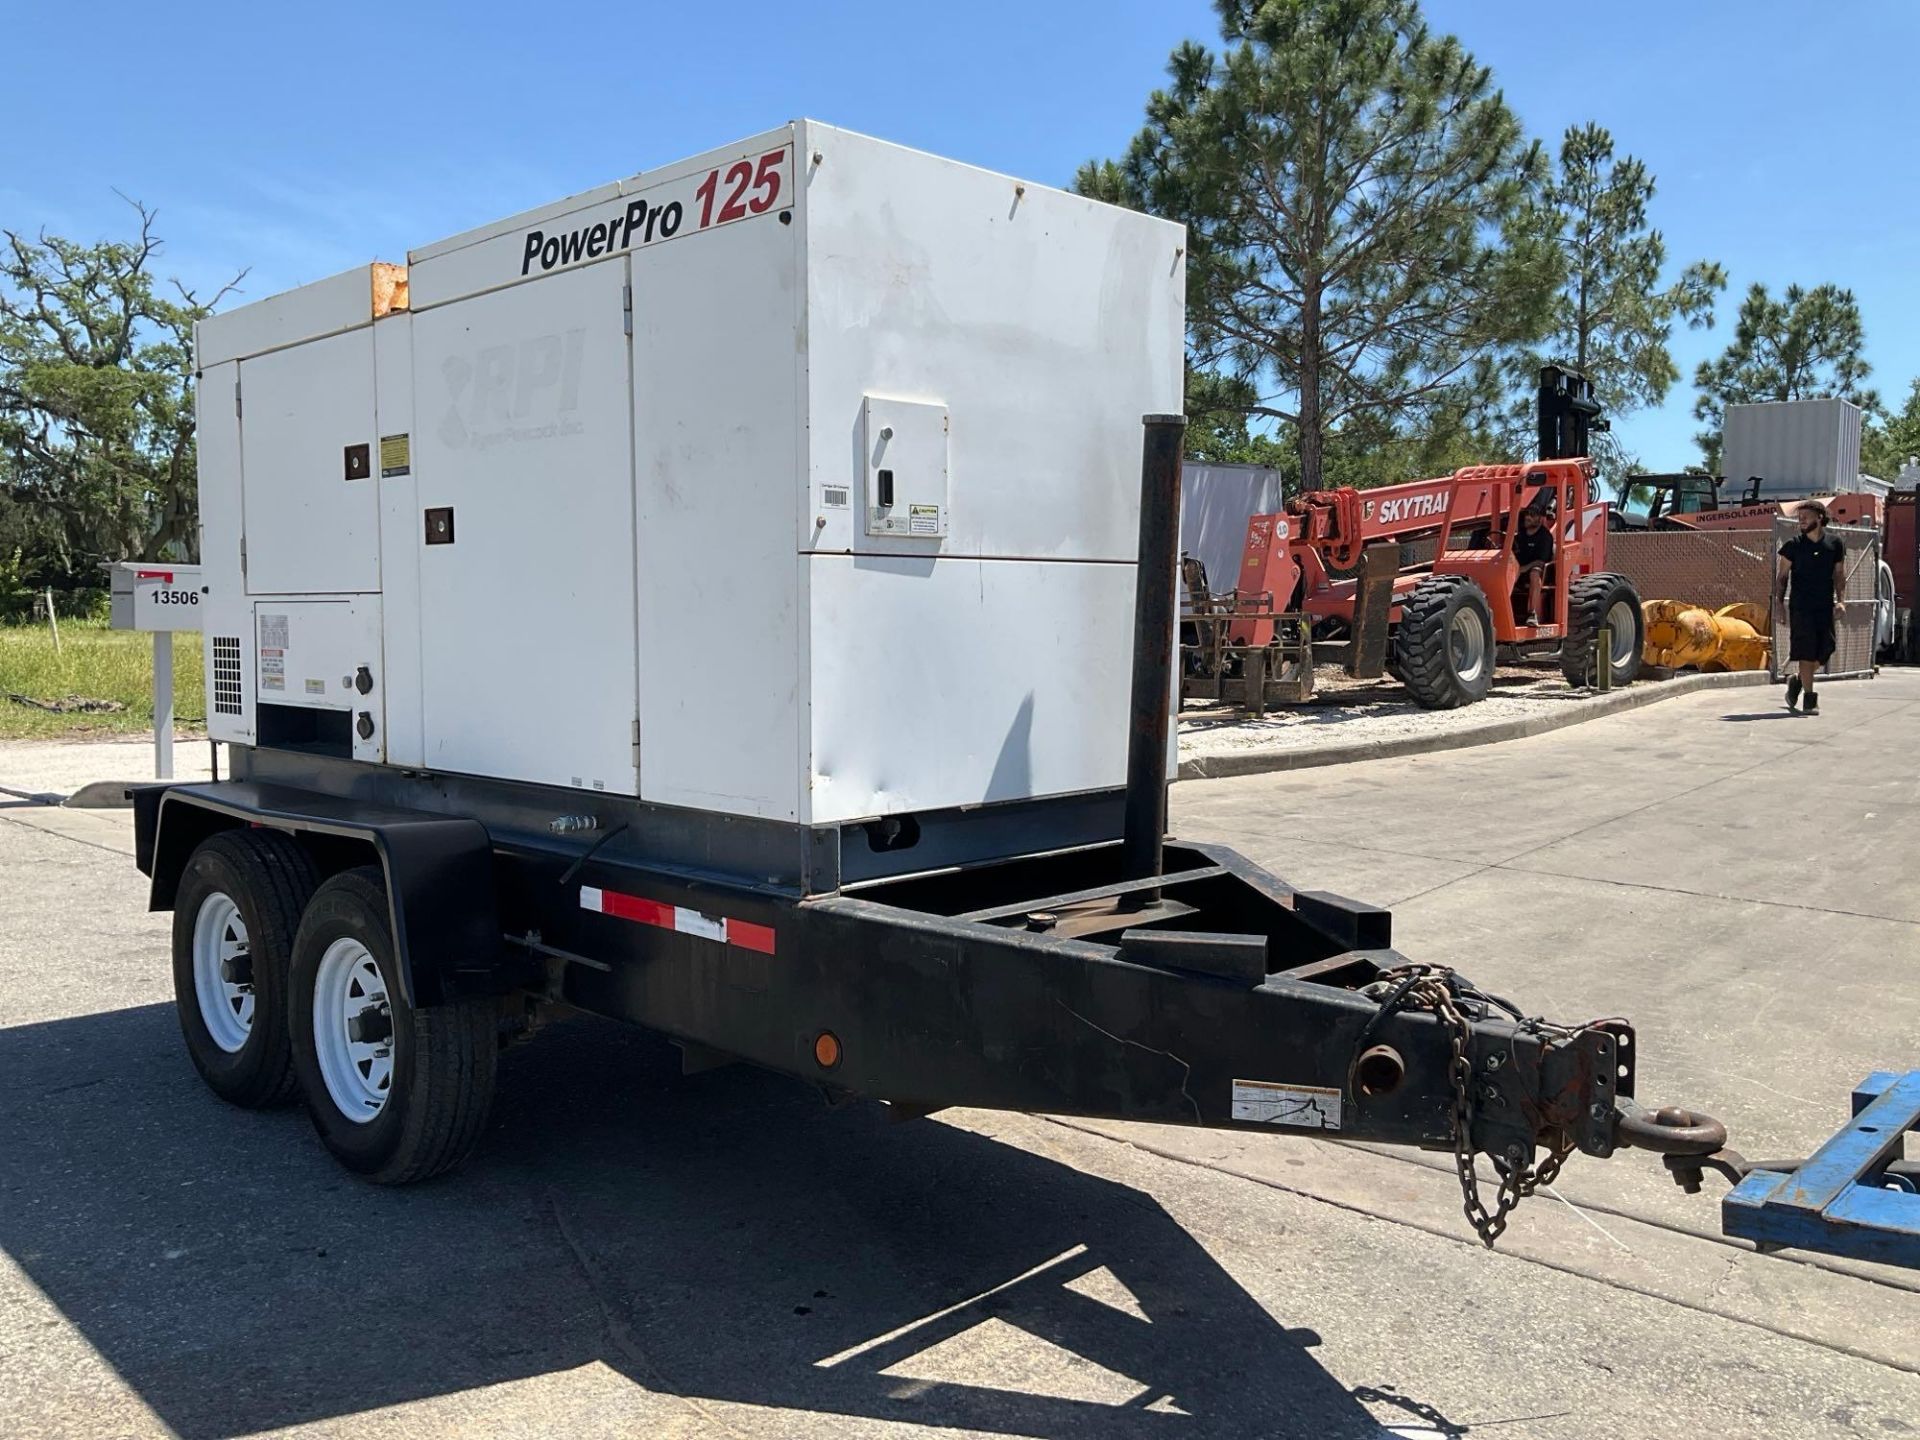 POWER PRO 125 GENERATOR MODEL SDG125S, DIESEL, TRAILER MOUNTED, APPROX 125 KVA OUTPUT, APPROX - Image 18 of 24